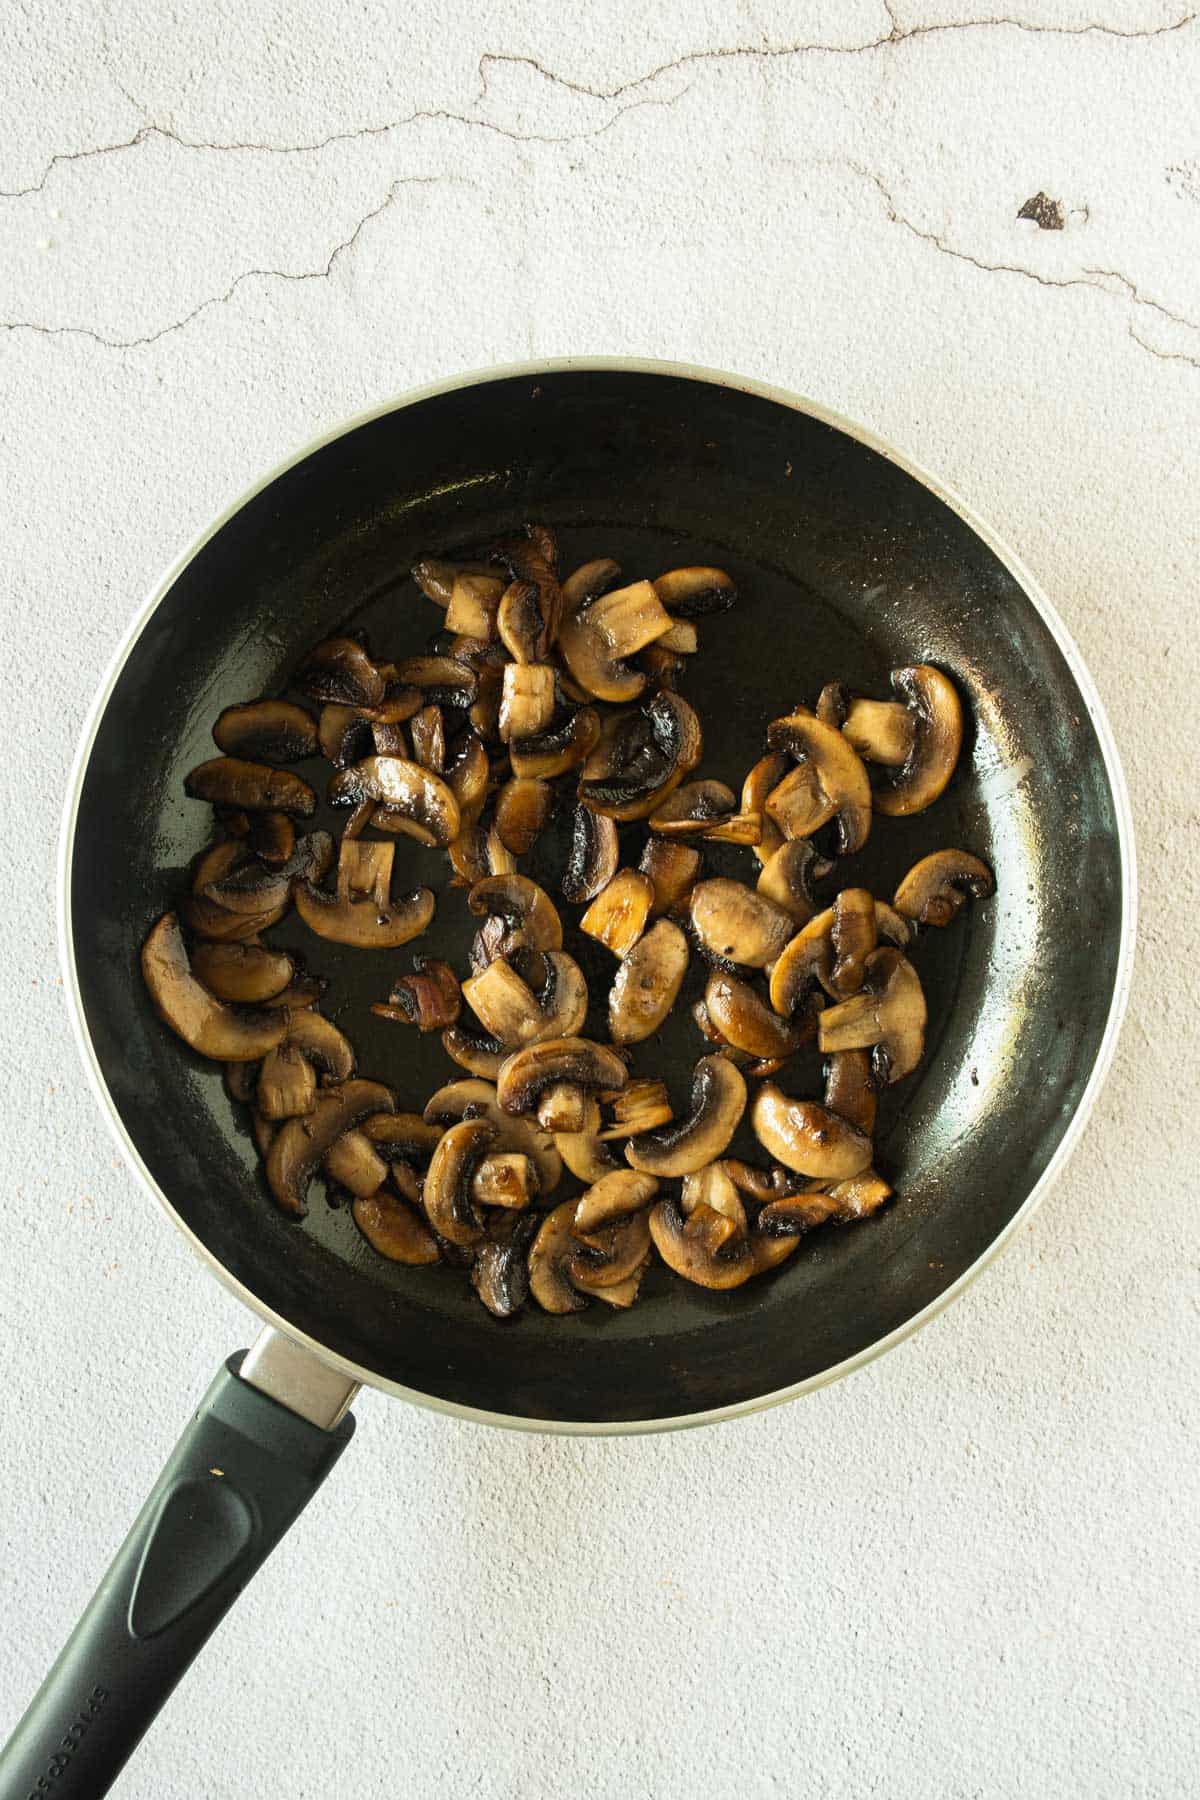 Mushrooms in a frying pan on a white surface.